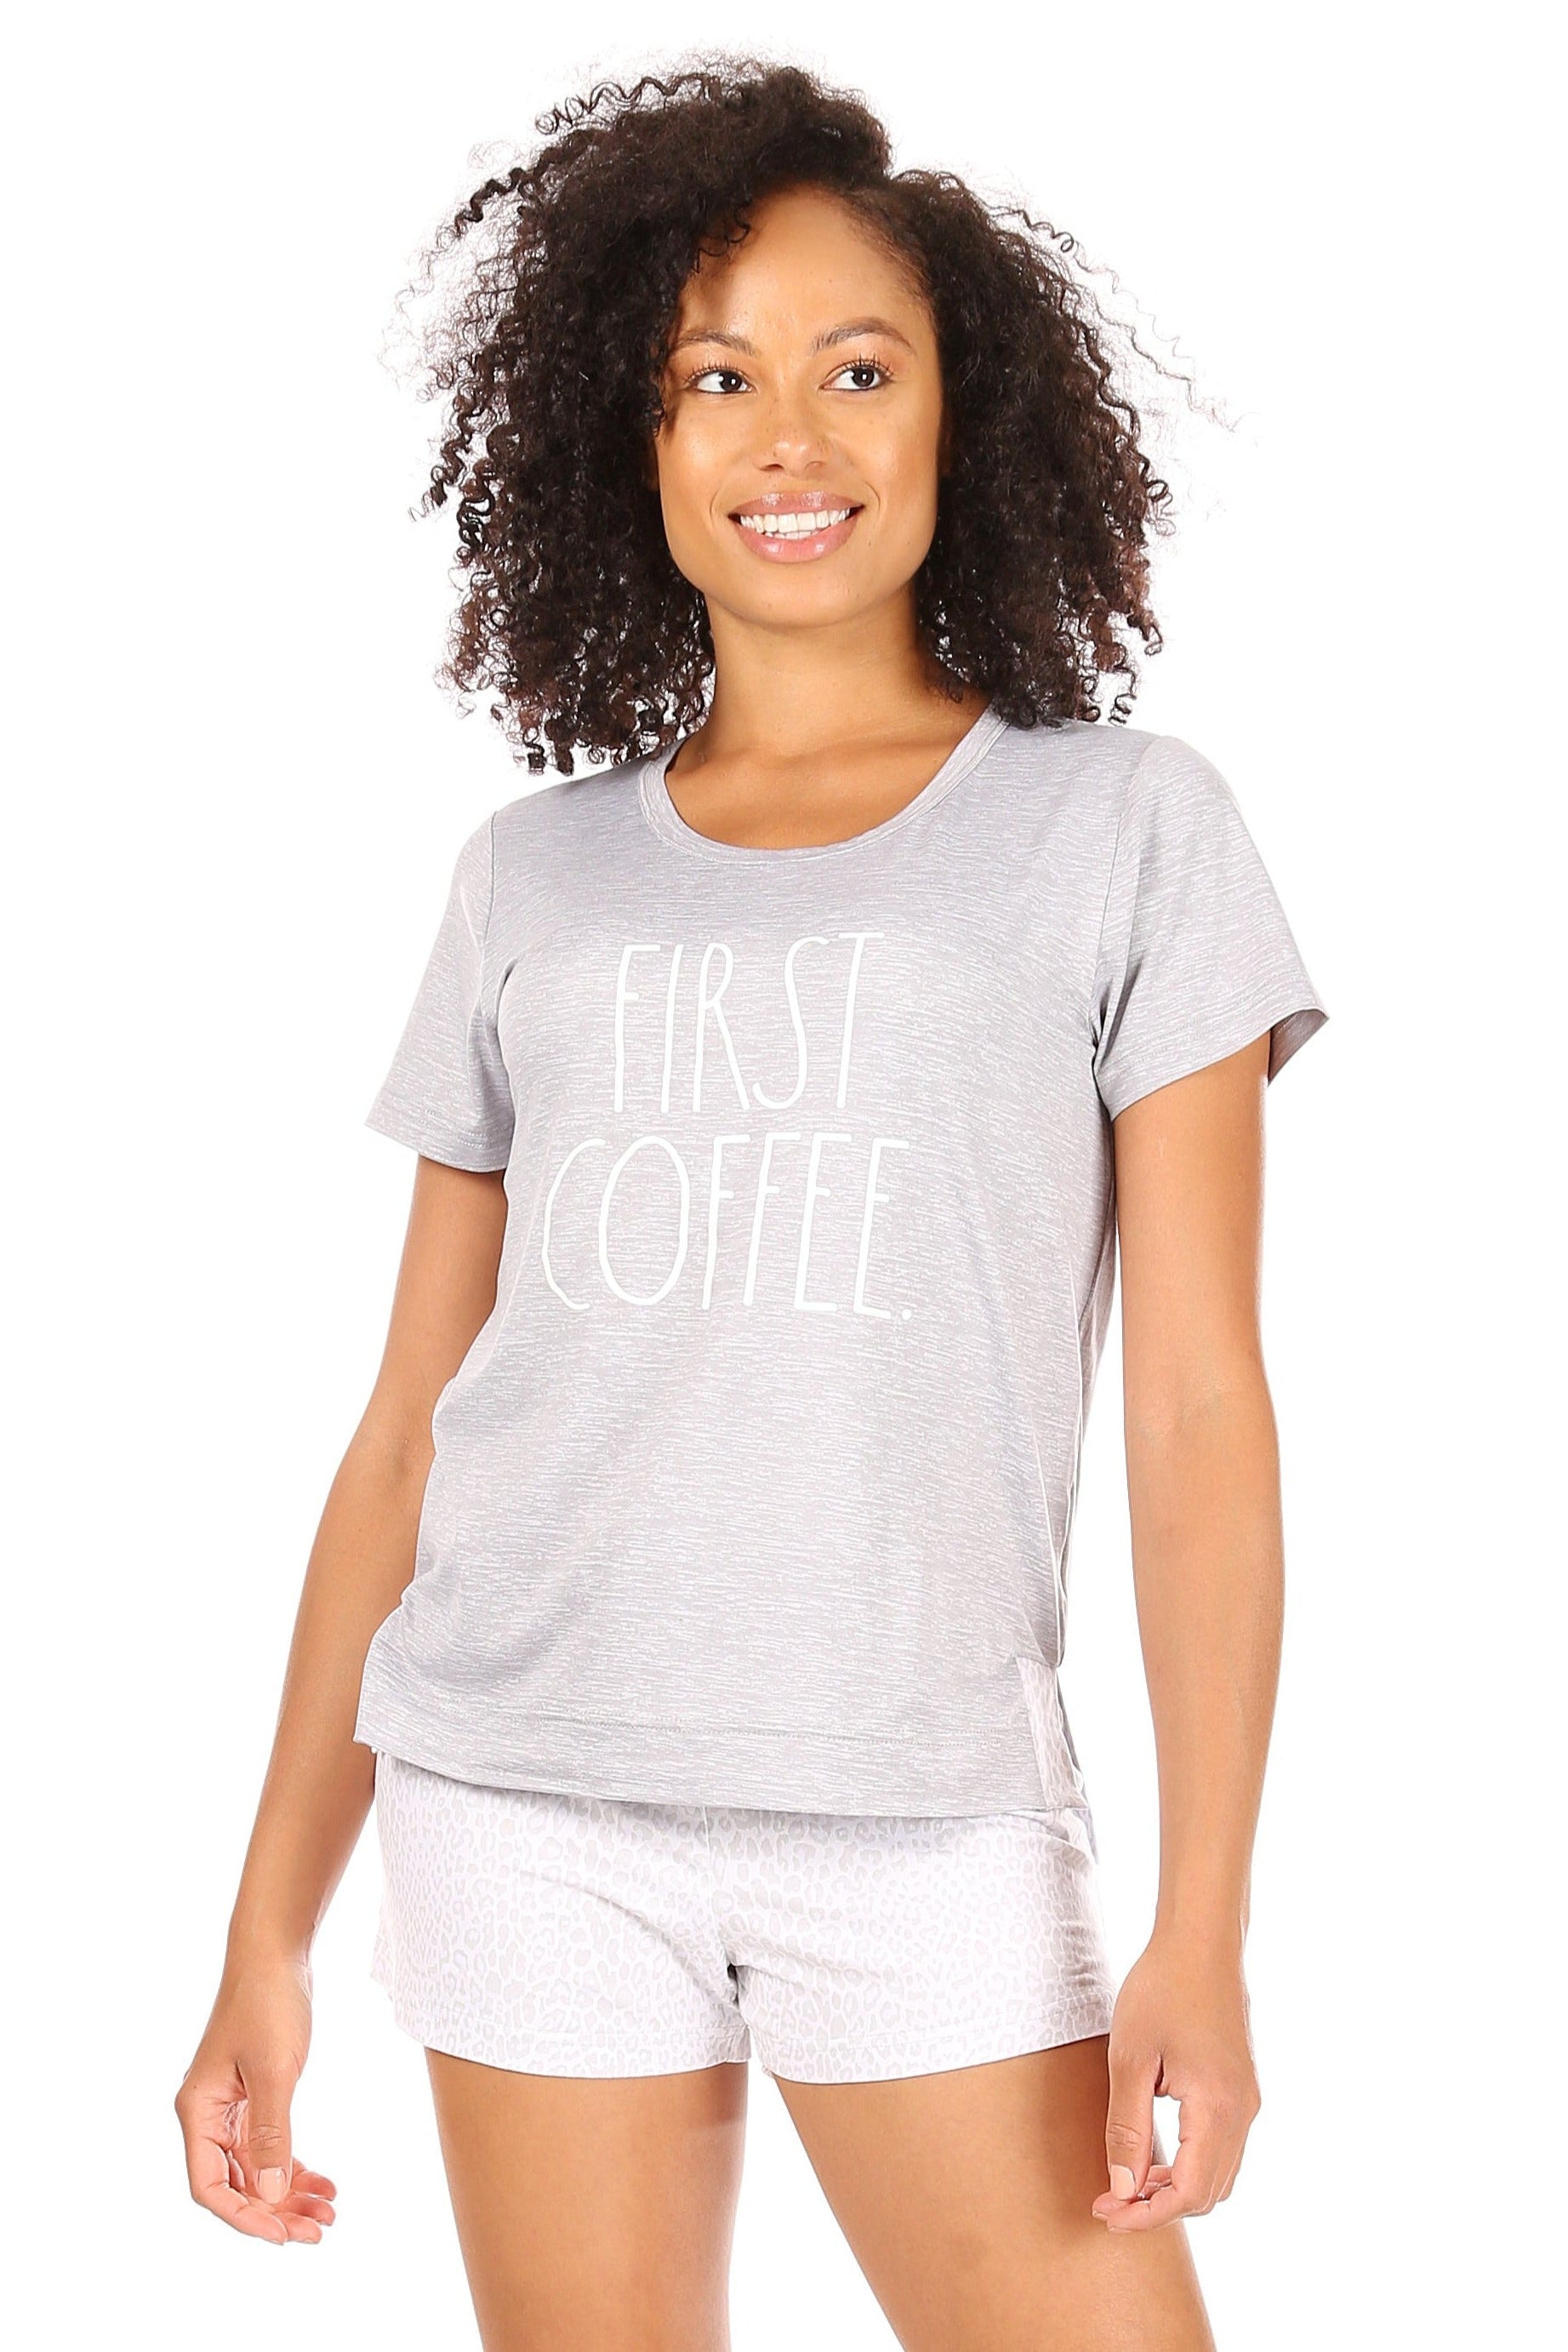 Women's "FIRST COFFEE" Short Sleeve Side Slit Top and Short Pajama Set - Rae Dunn Wear